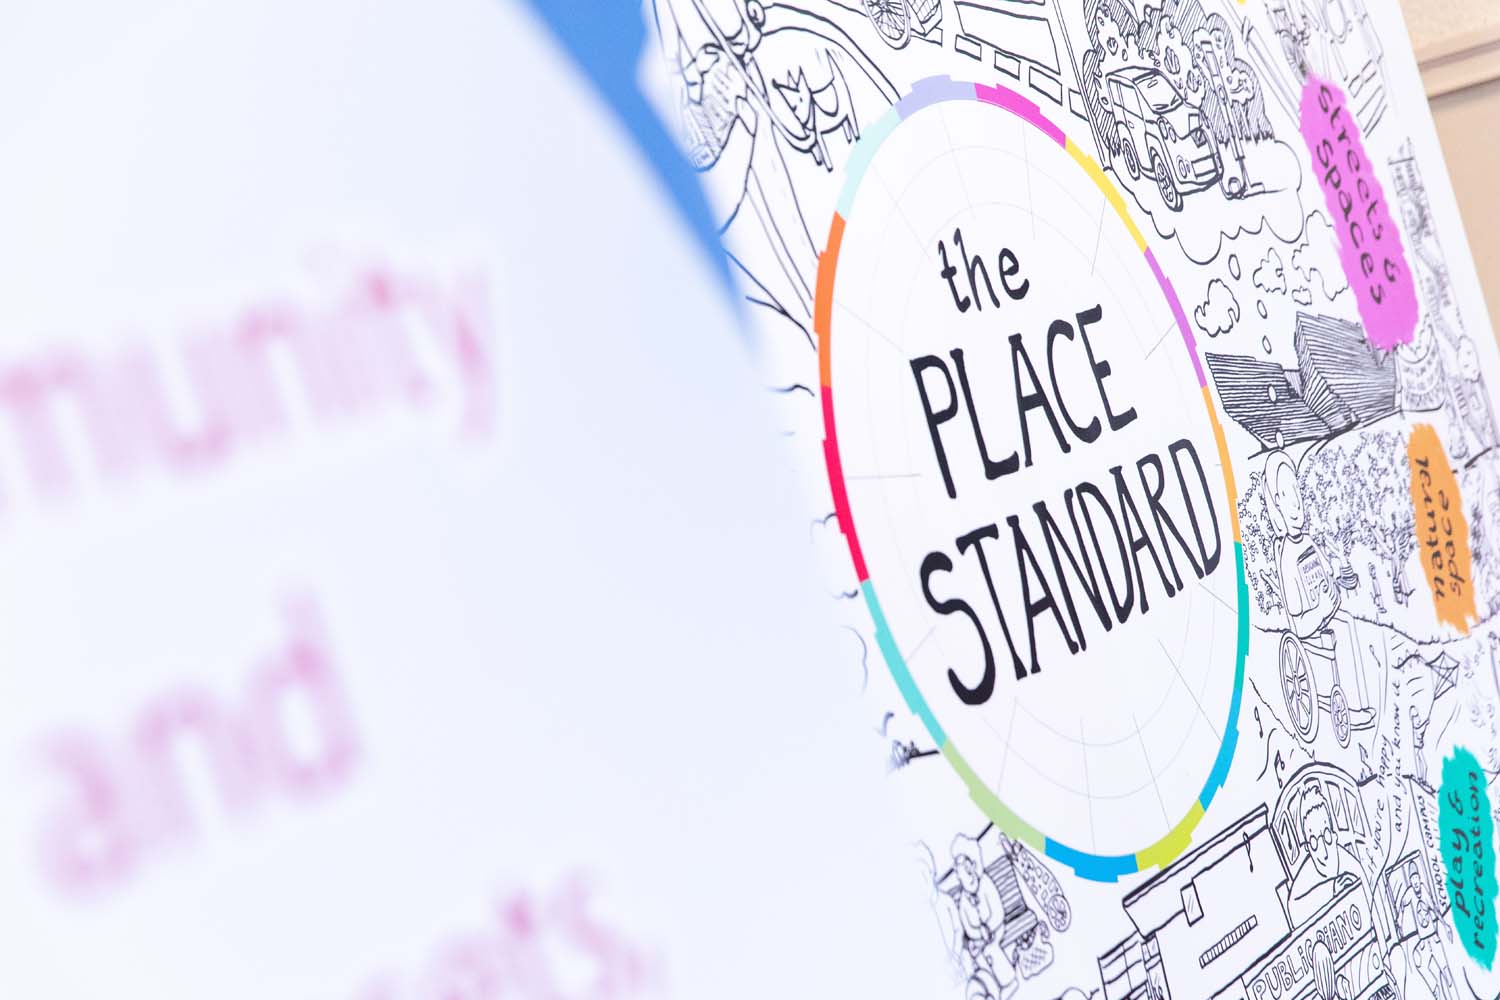 An illustration of the Place Standard wheel with bright colours and people around it. 'the Place Standard' is written in the centre.